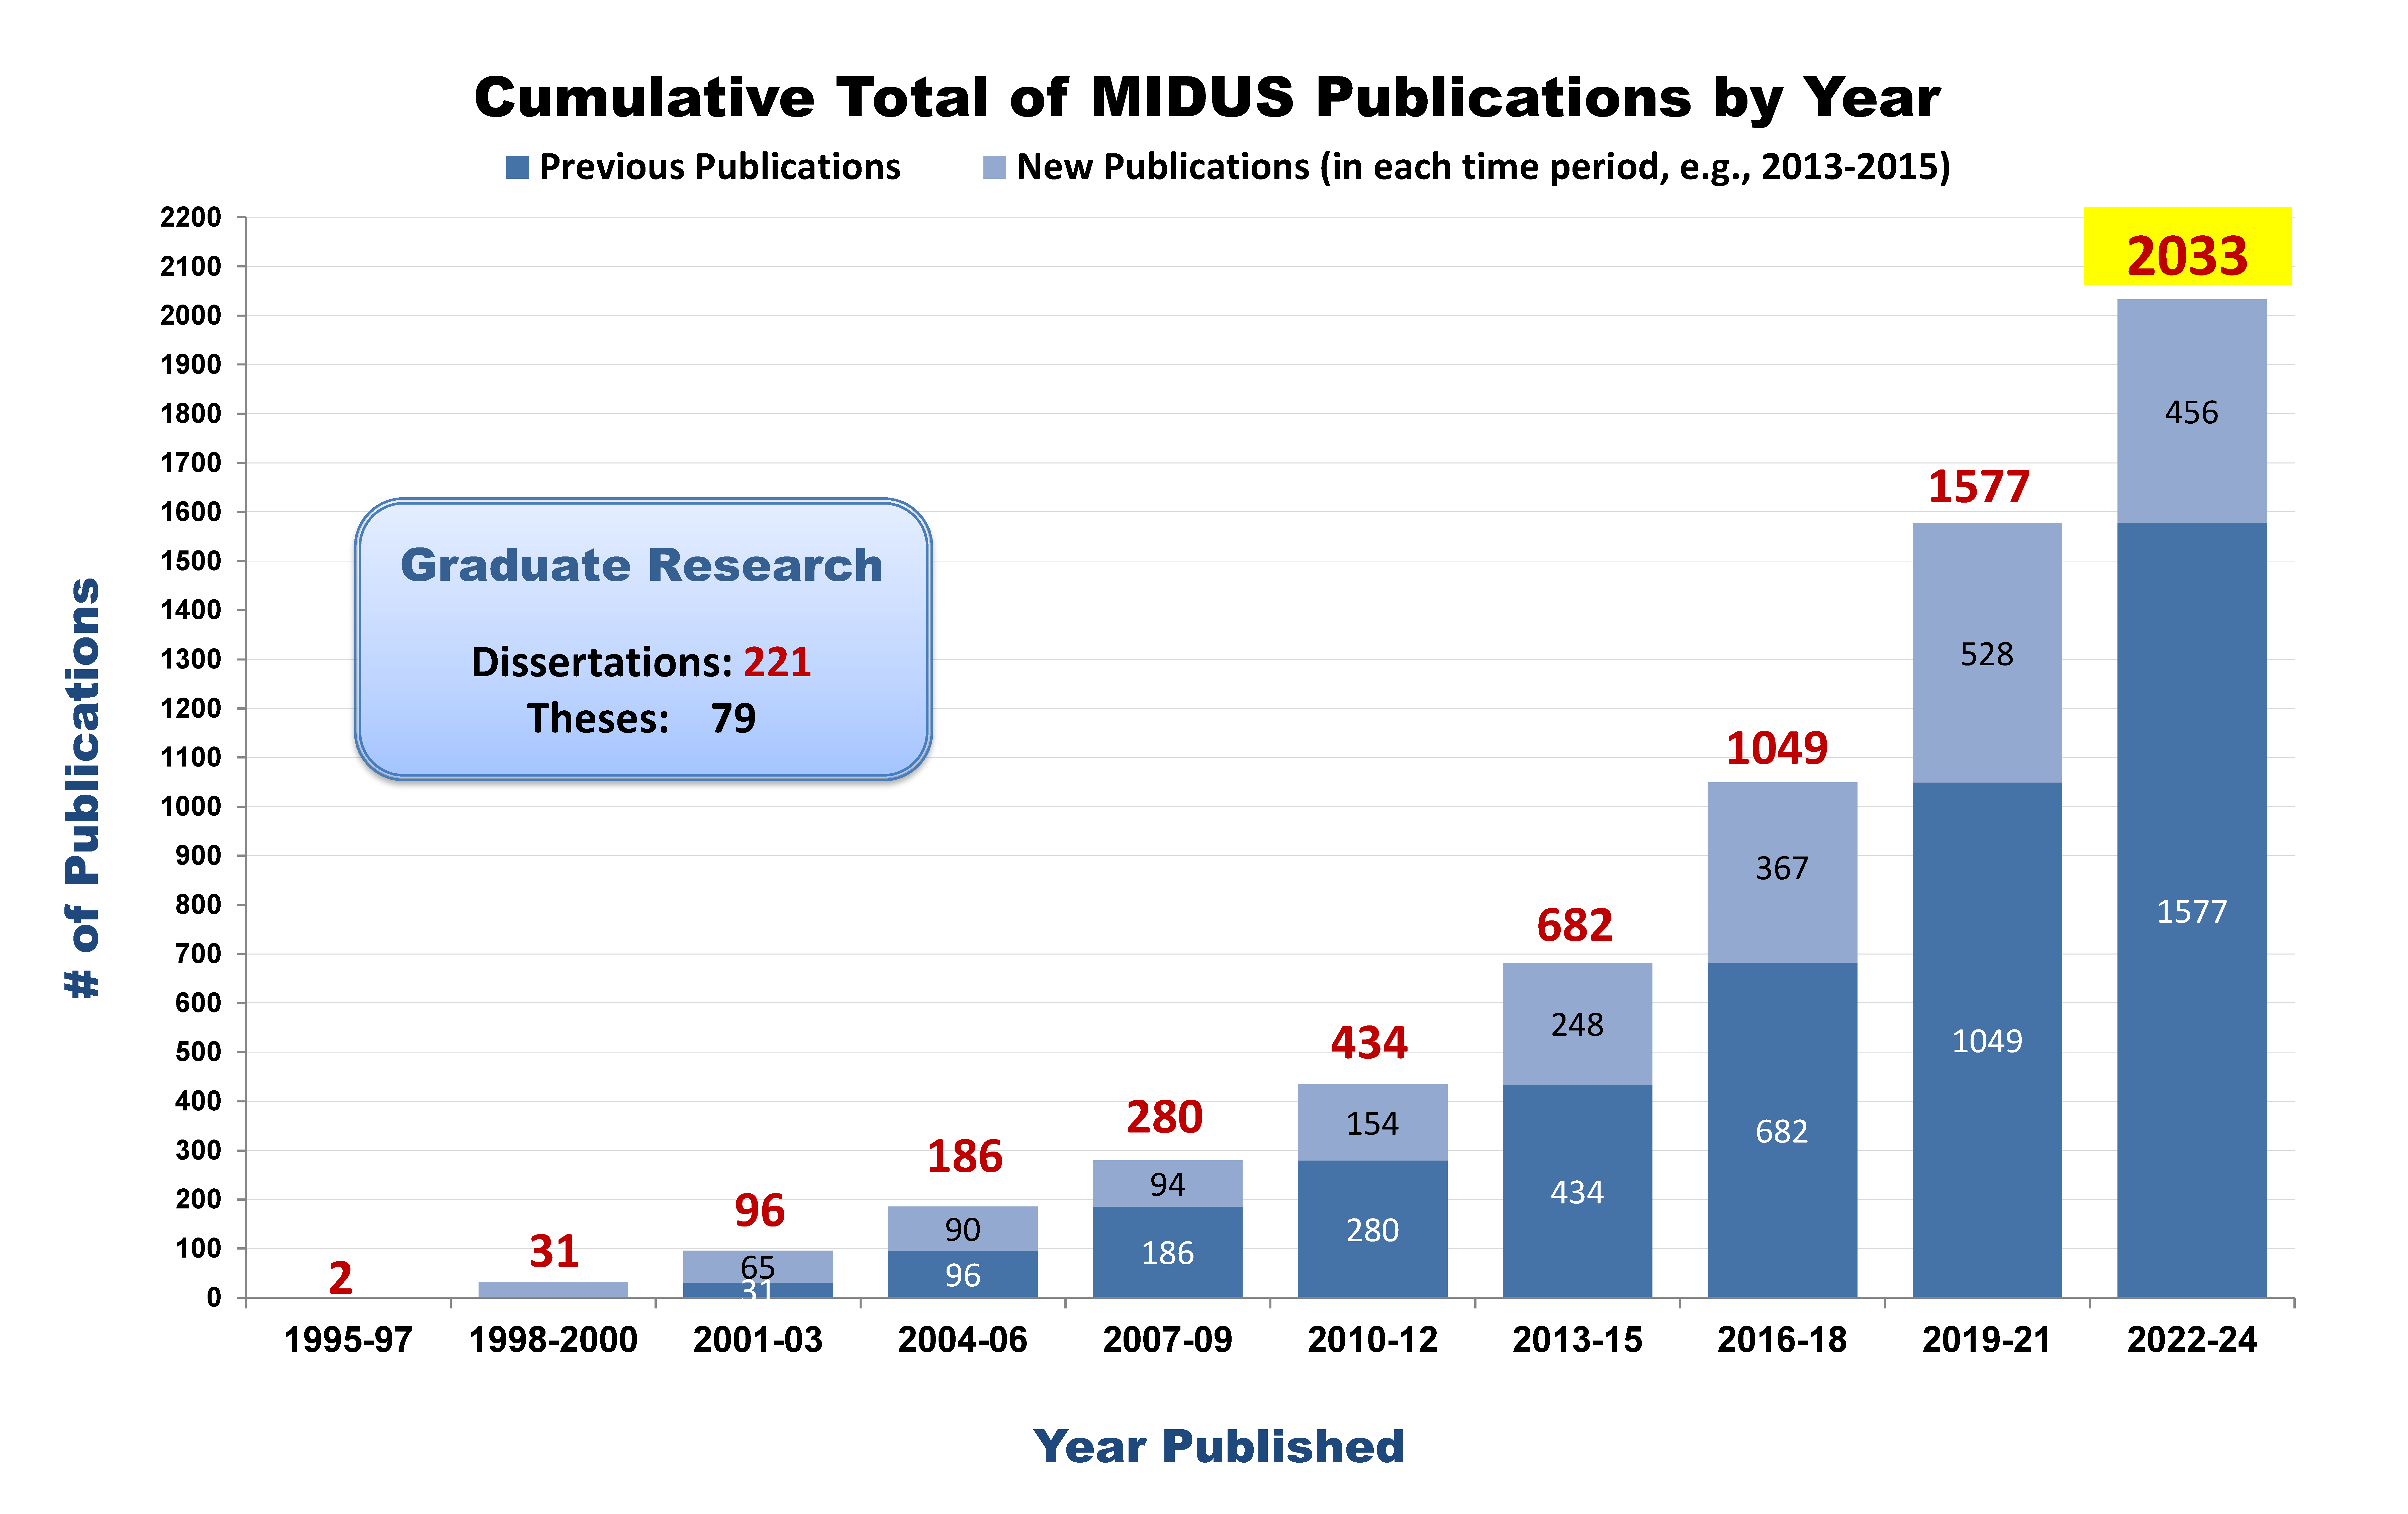 # of MIDUS pubs by year